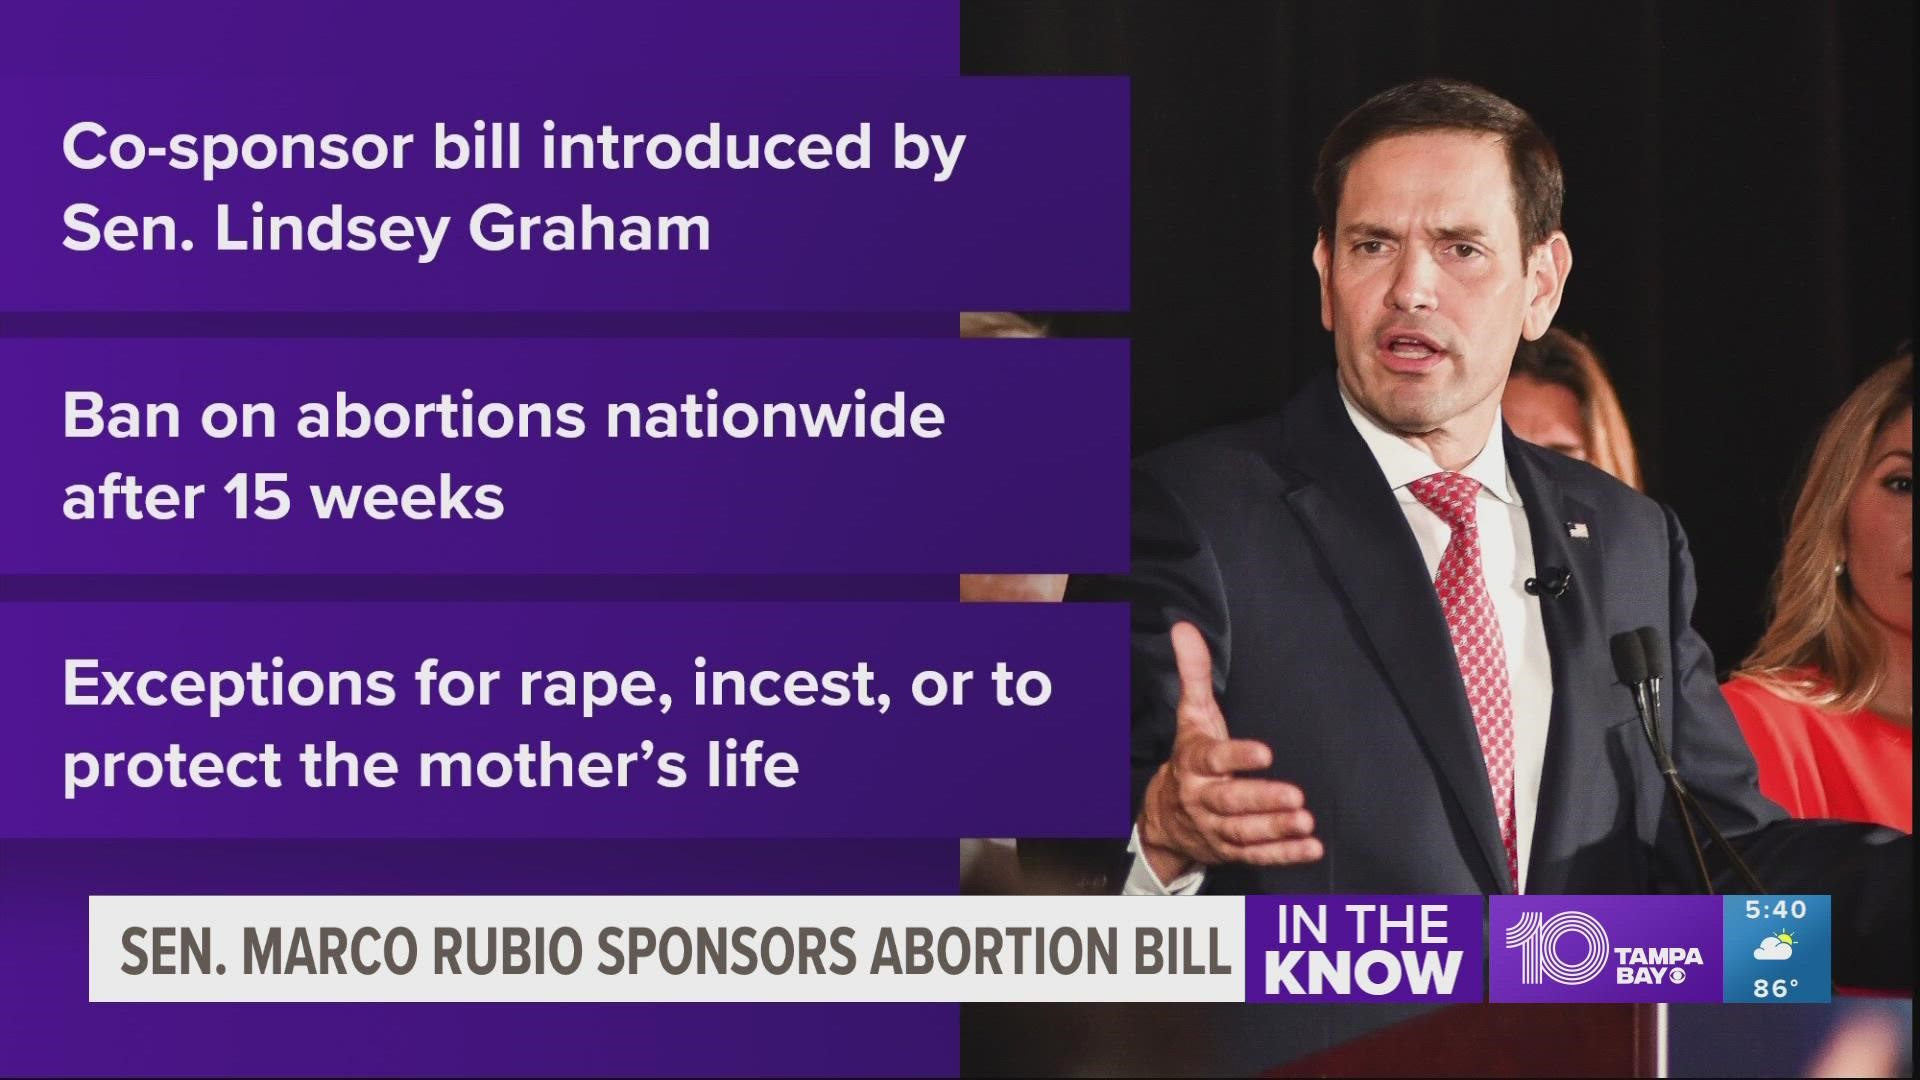 The bill, introduced By Sen. Lindsey Graham, ignites fresh debate on the issue after the Supreme Court overturned Roe v. Wade.